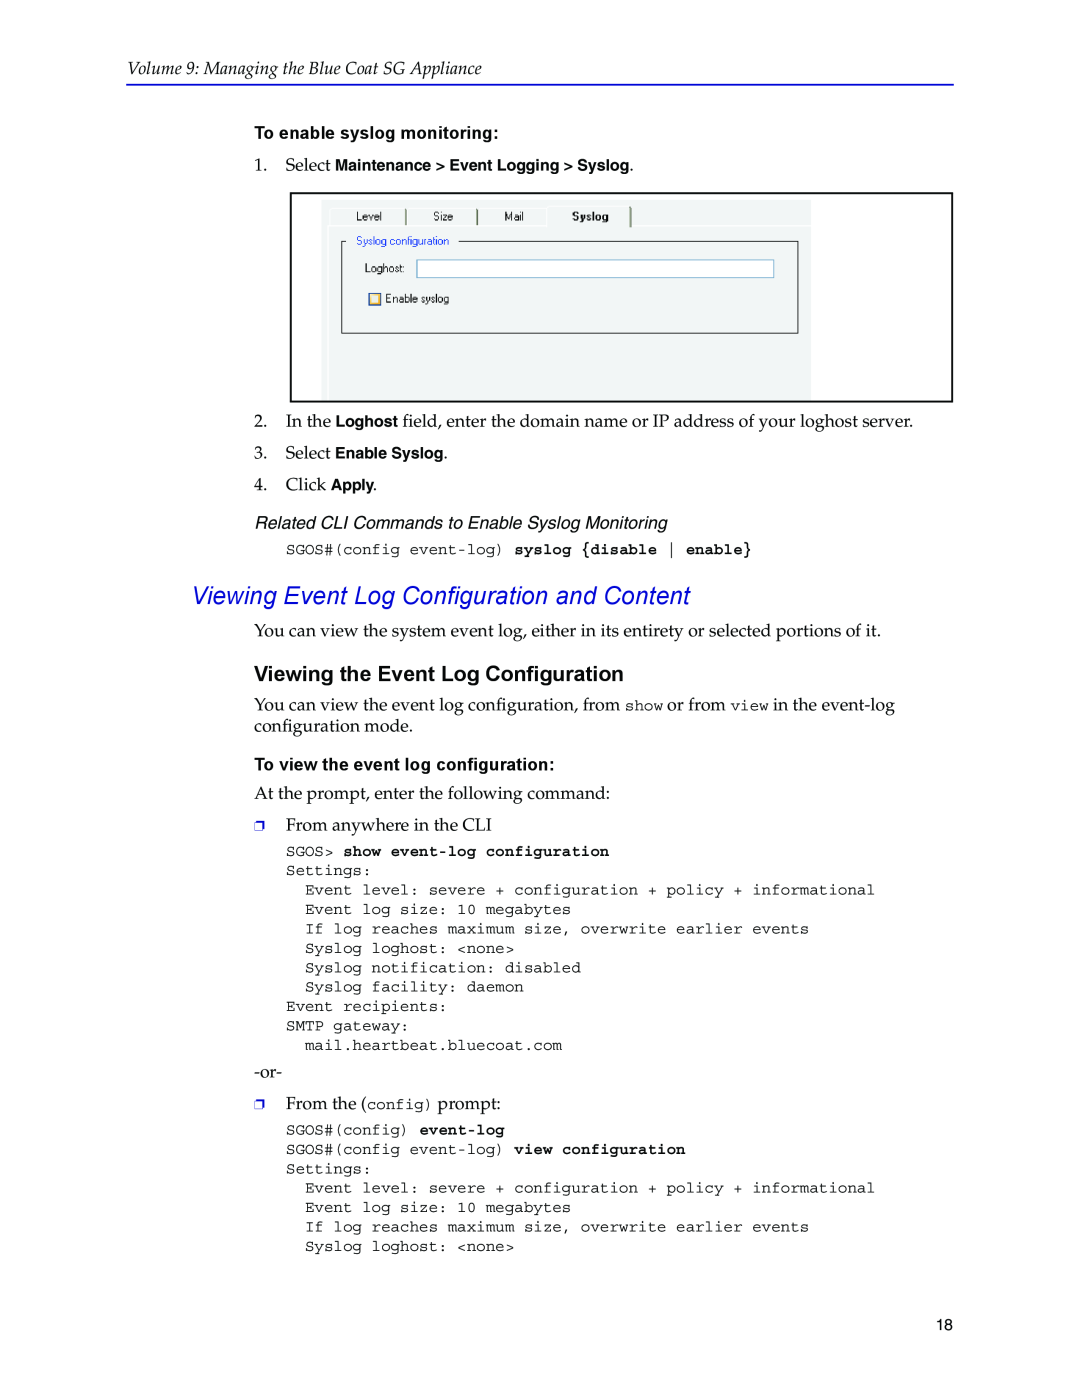 Blue Coat Systems SGOS Version 5.2.2 Viewing Event Log Configuration and Content, Viewing the Event Log Configuration 